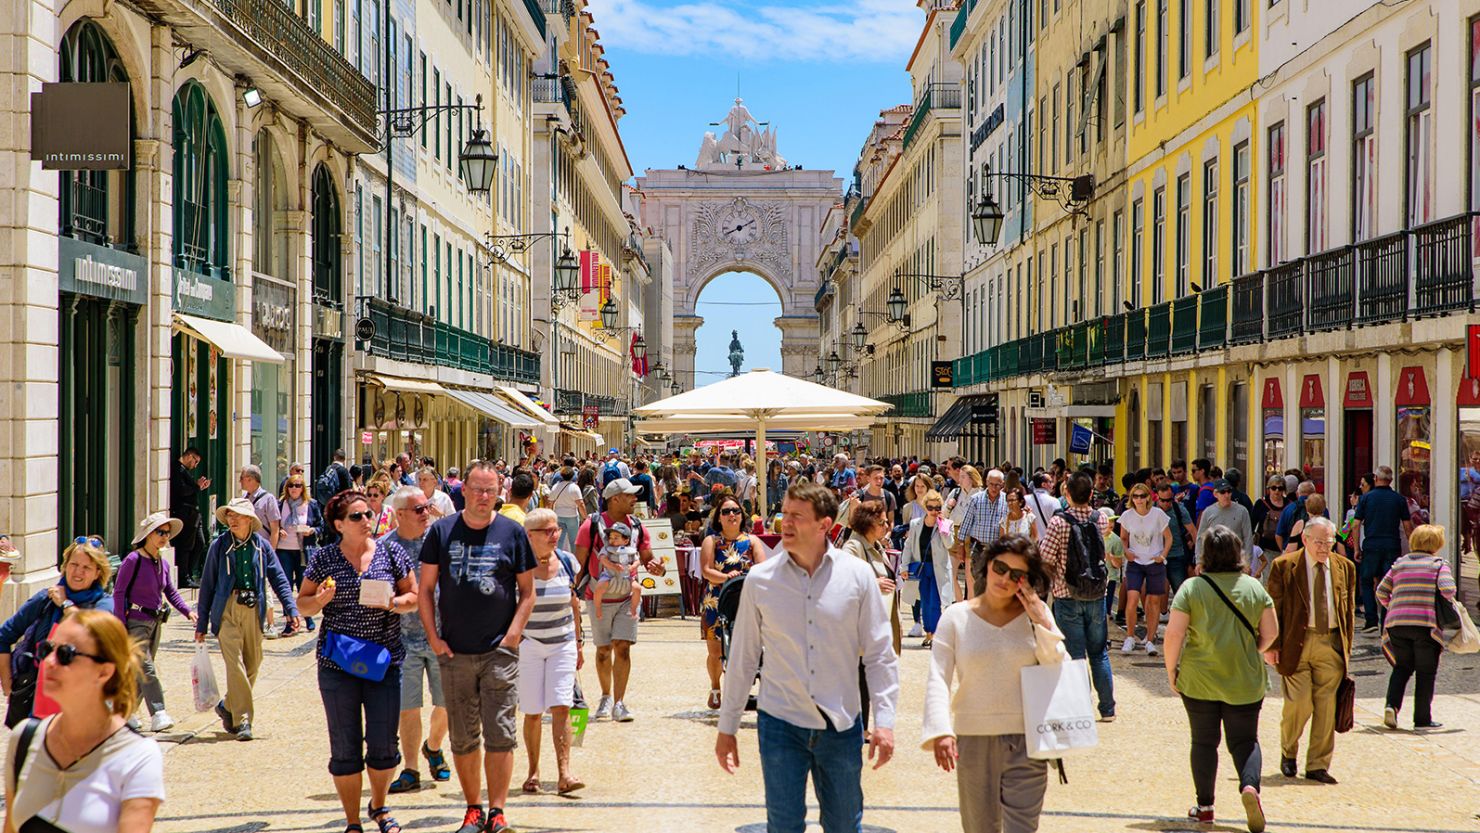 Increasing visitor numbers are among the causes of Portugal's housing crisis.